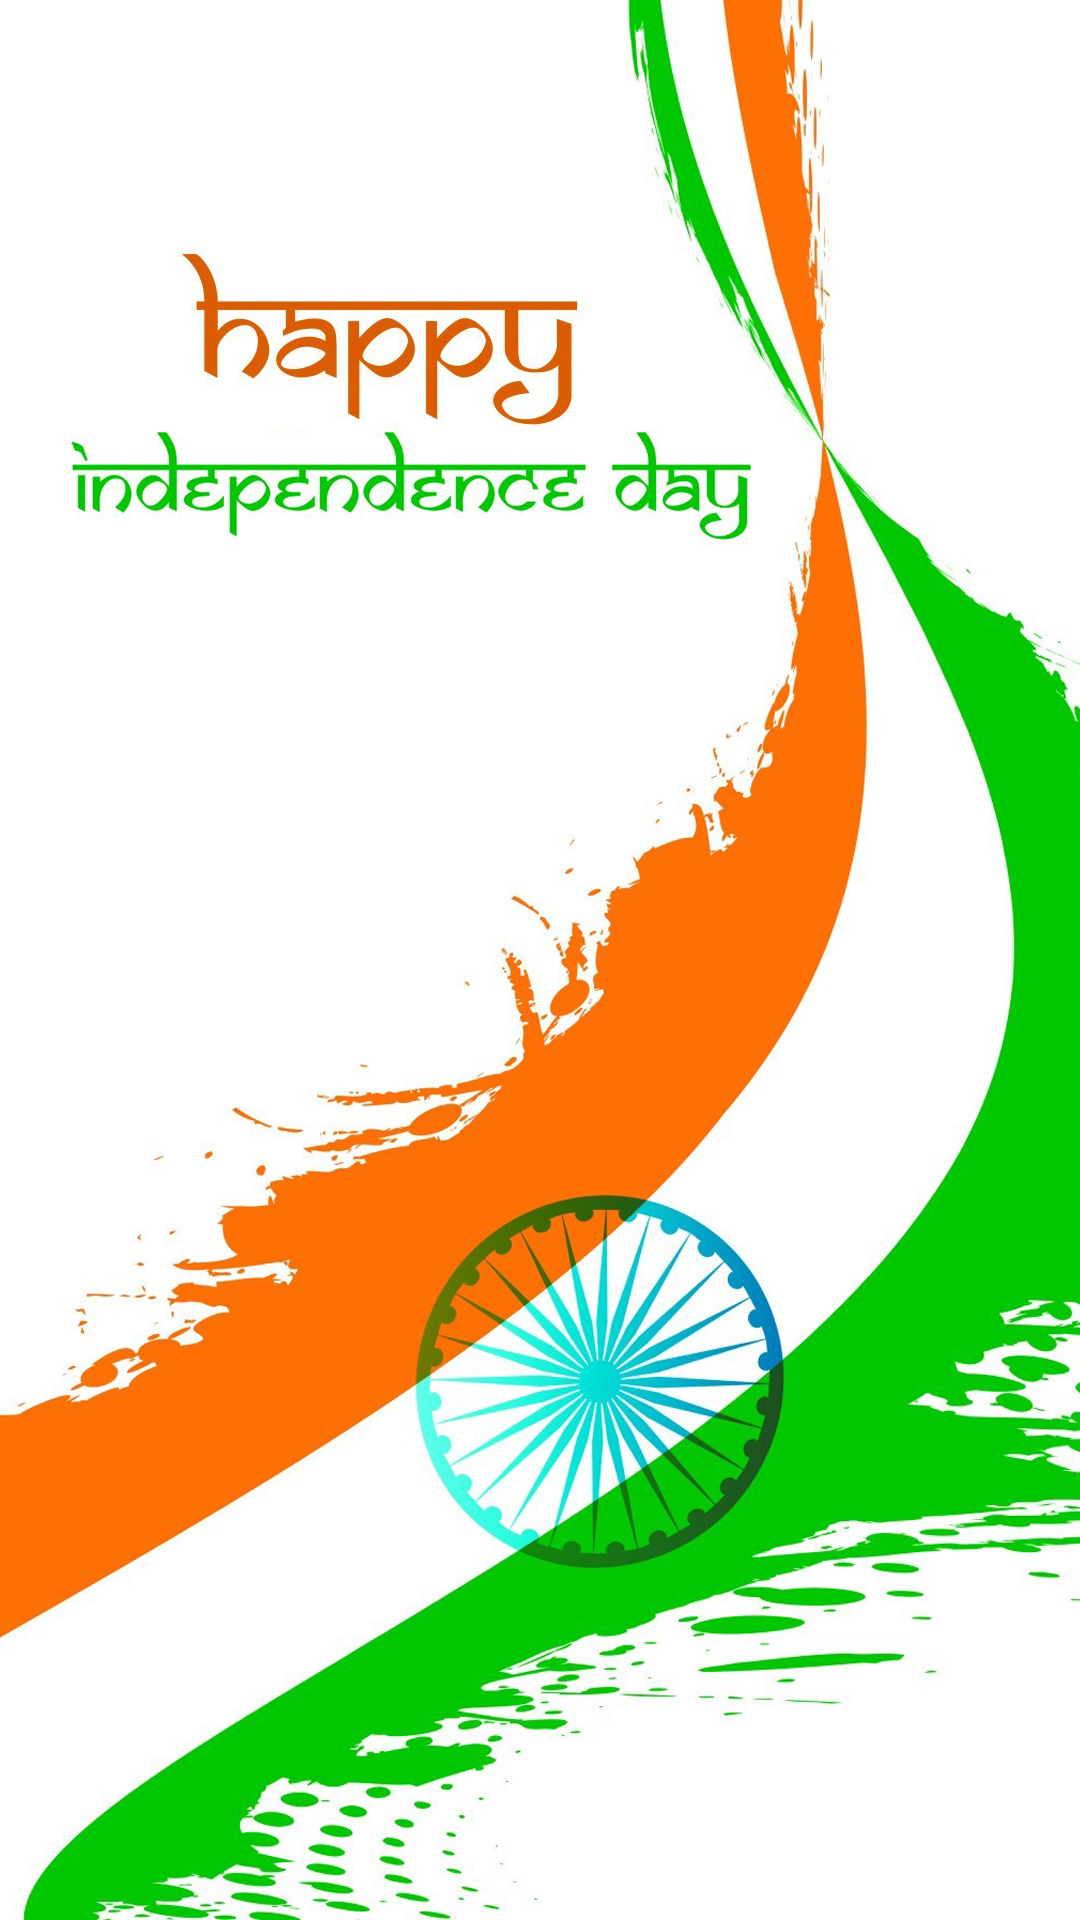 india independence day - photo #38